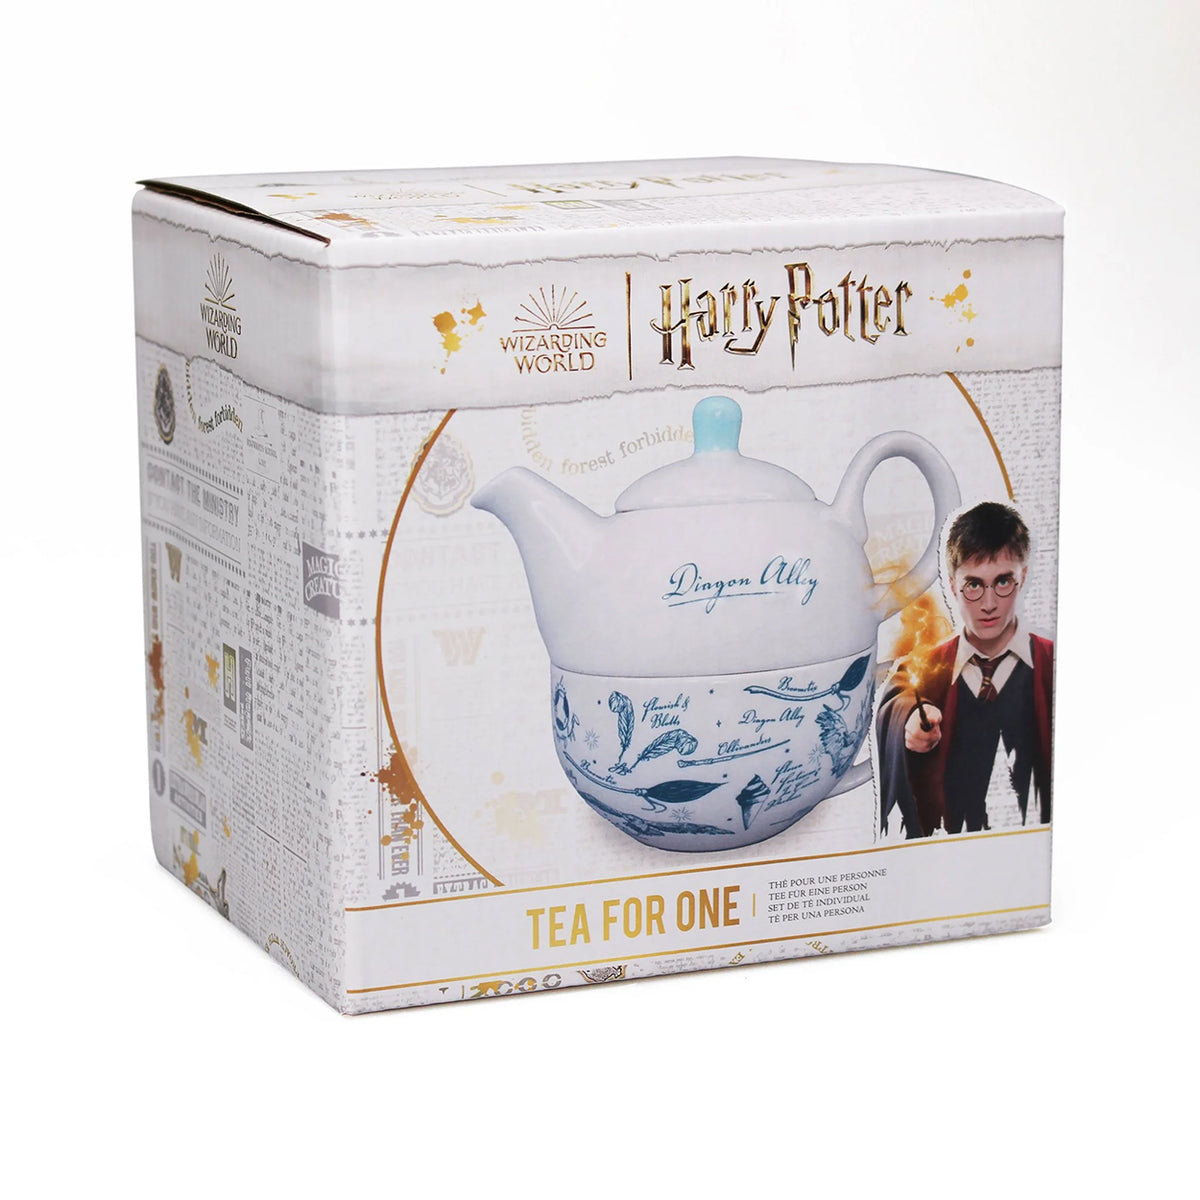 Diagon Alley Tea for One Set (packaged)